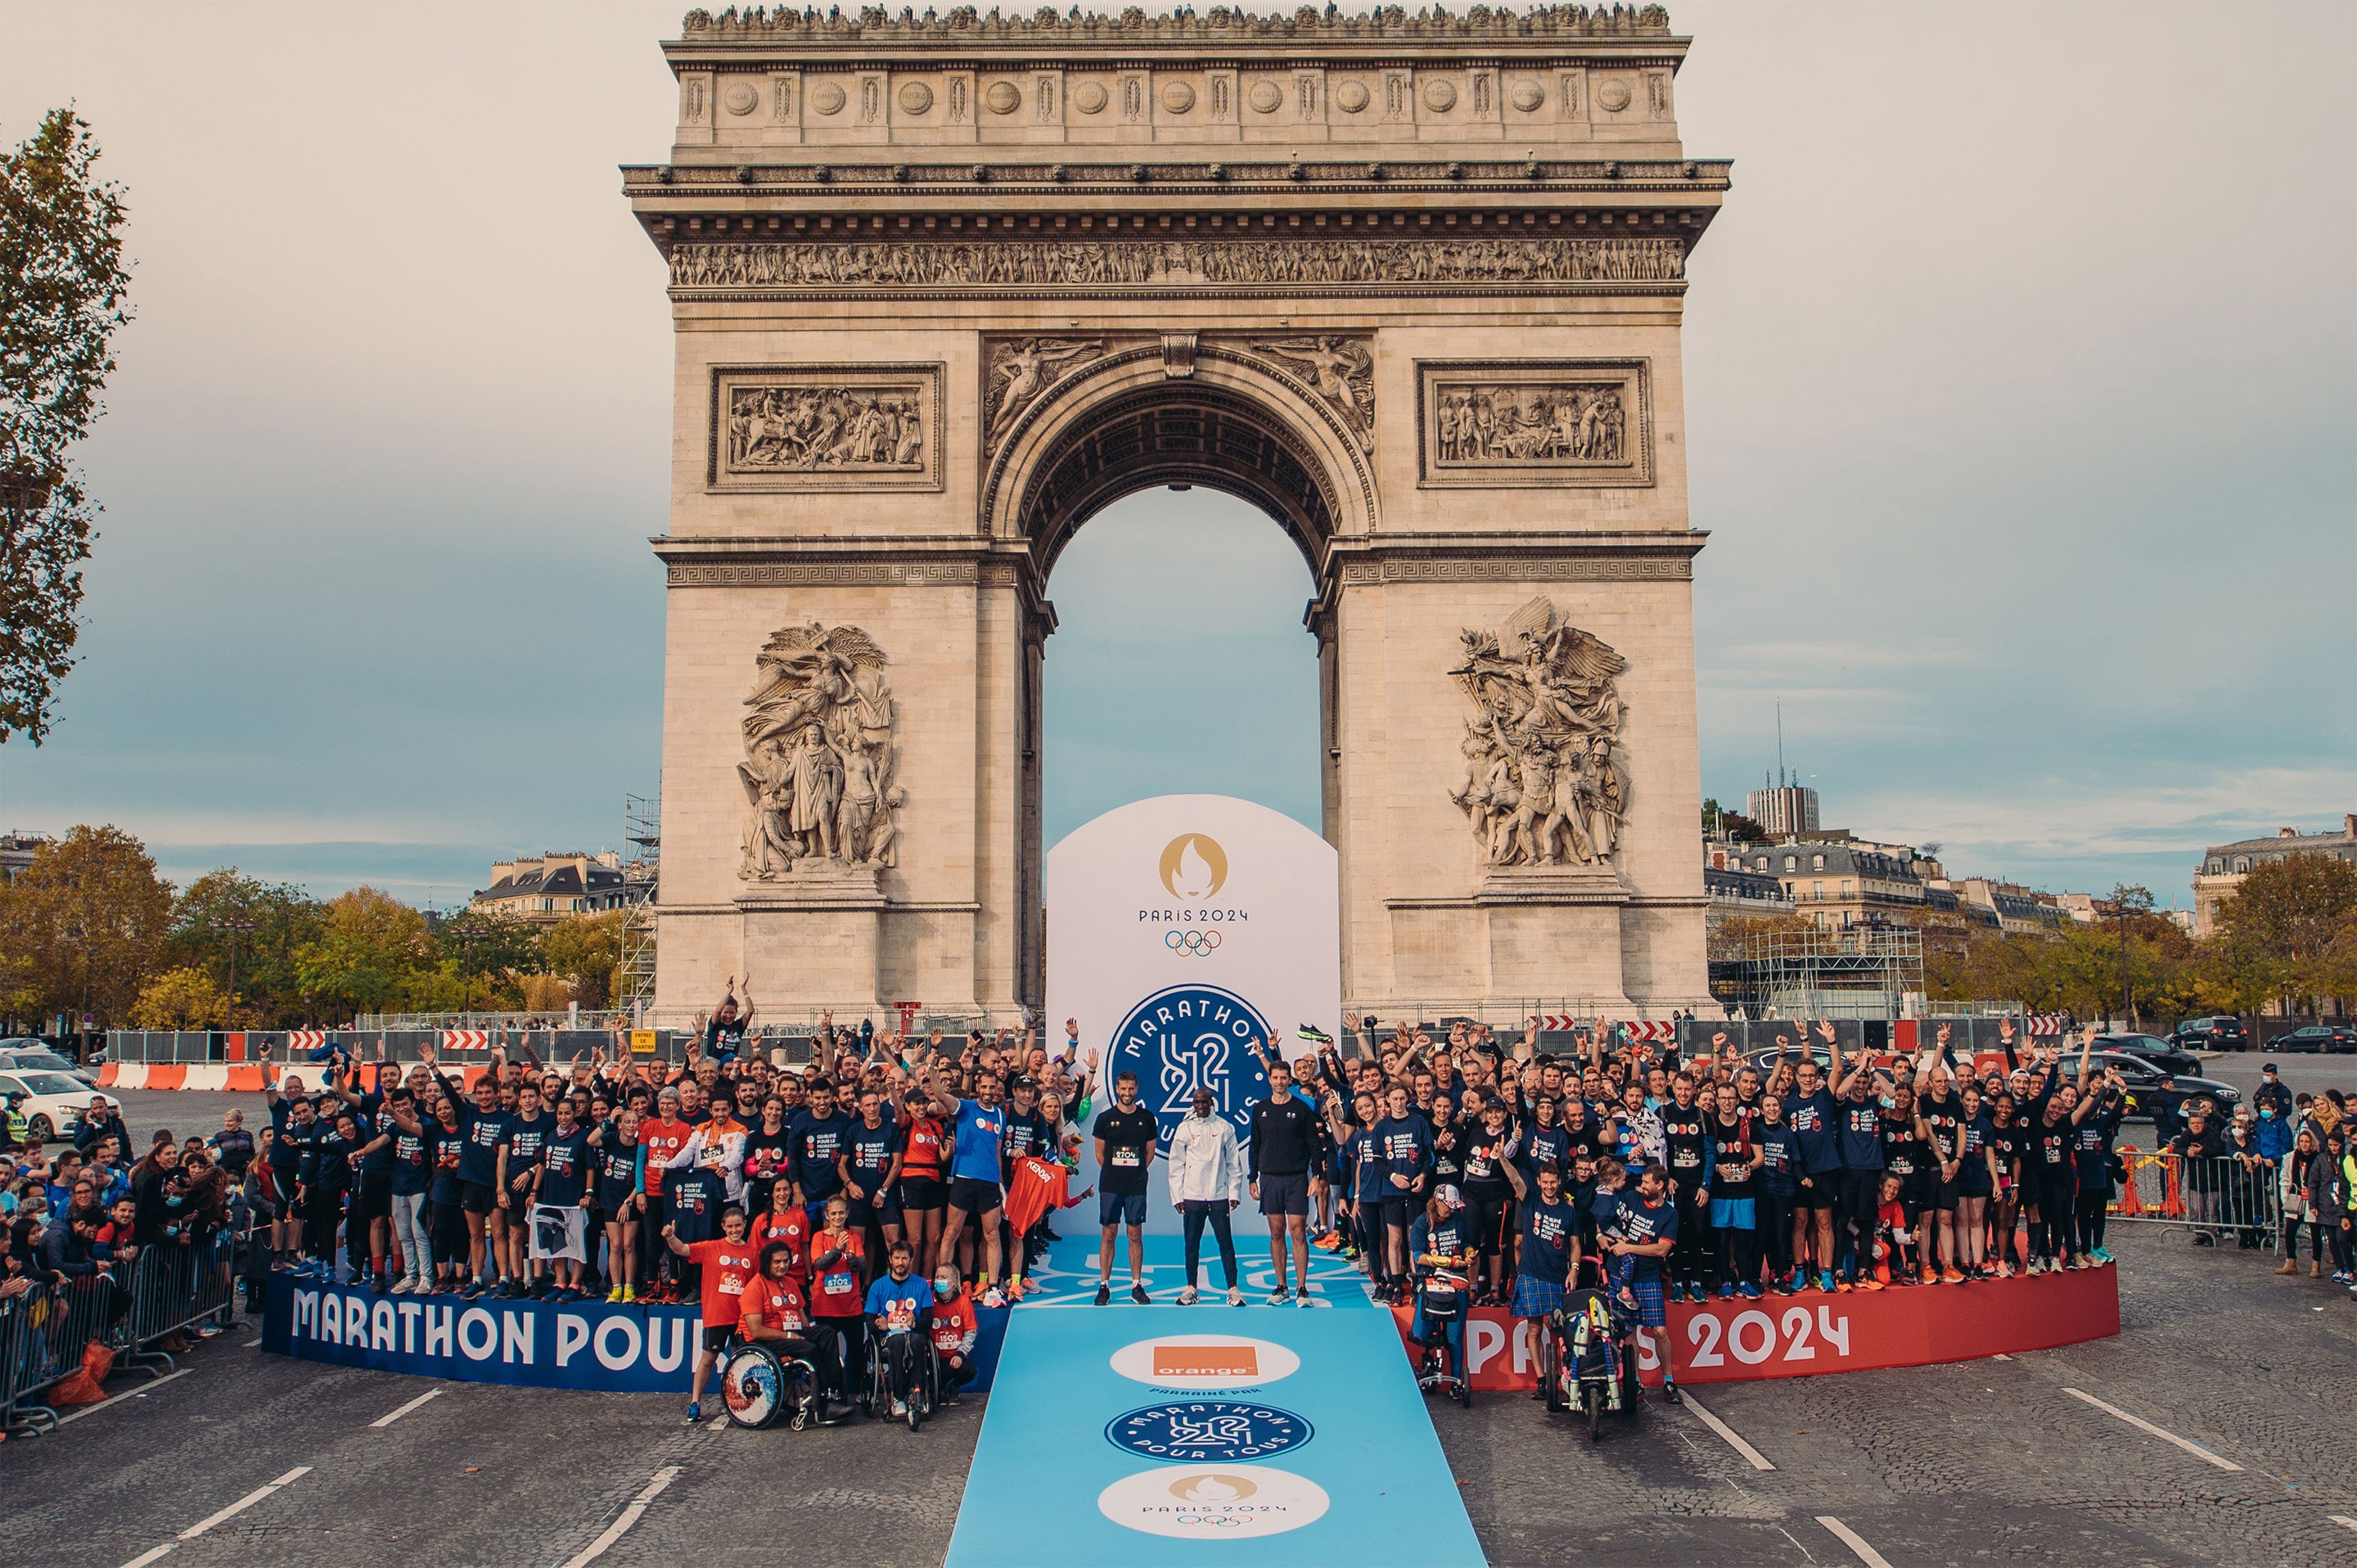 Paris 2024 Olympic Games: LVMH group enters the homestretch